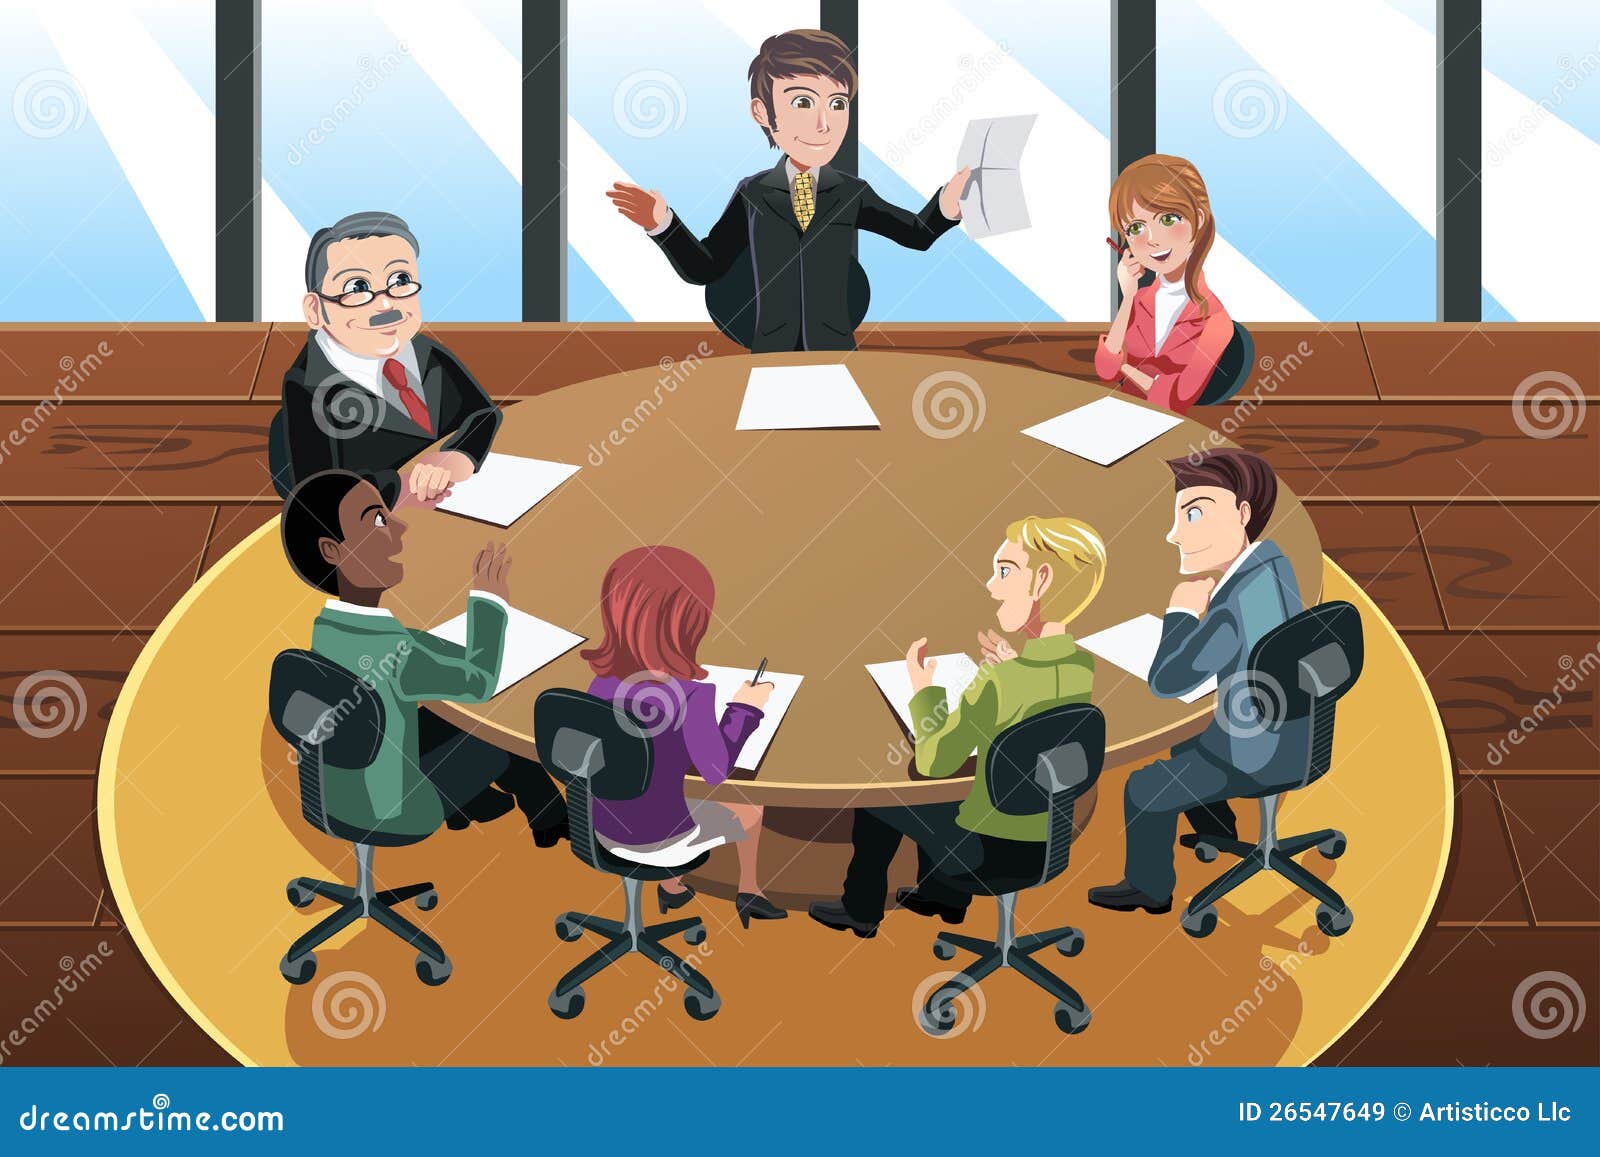 free clipart business meeting - photo #32